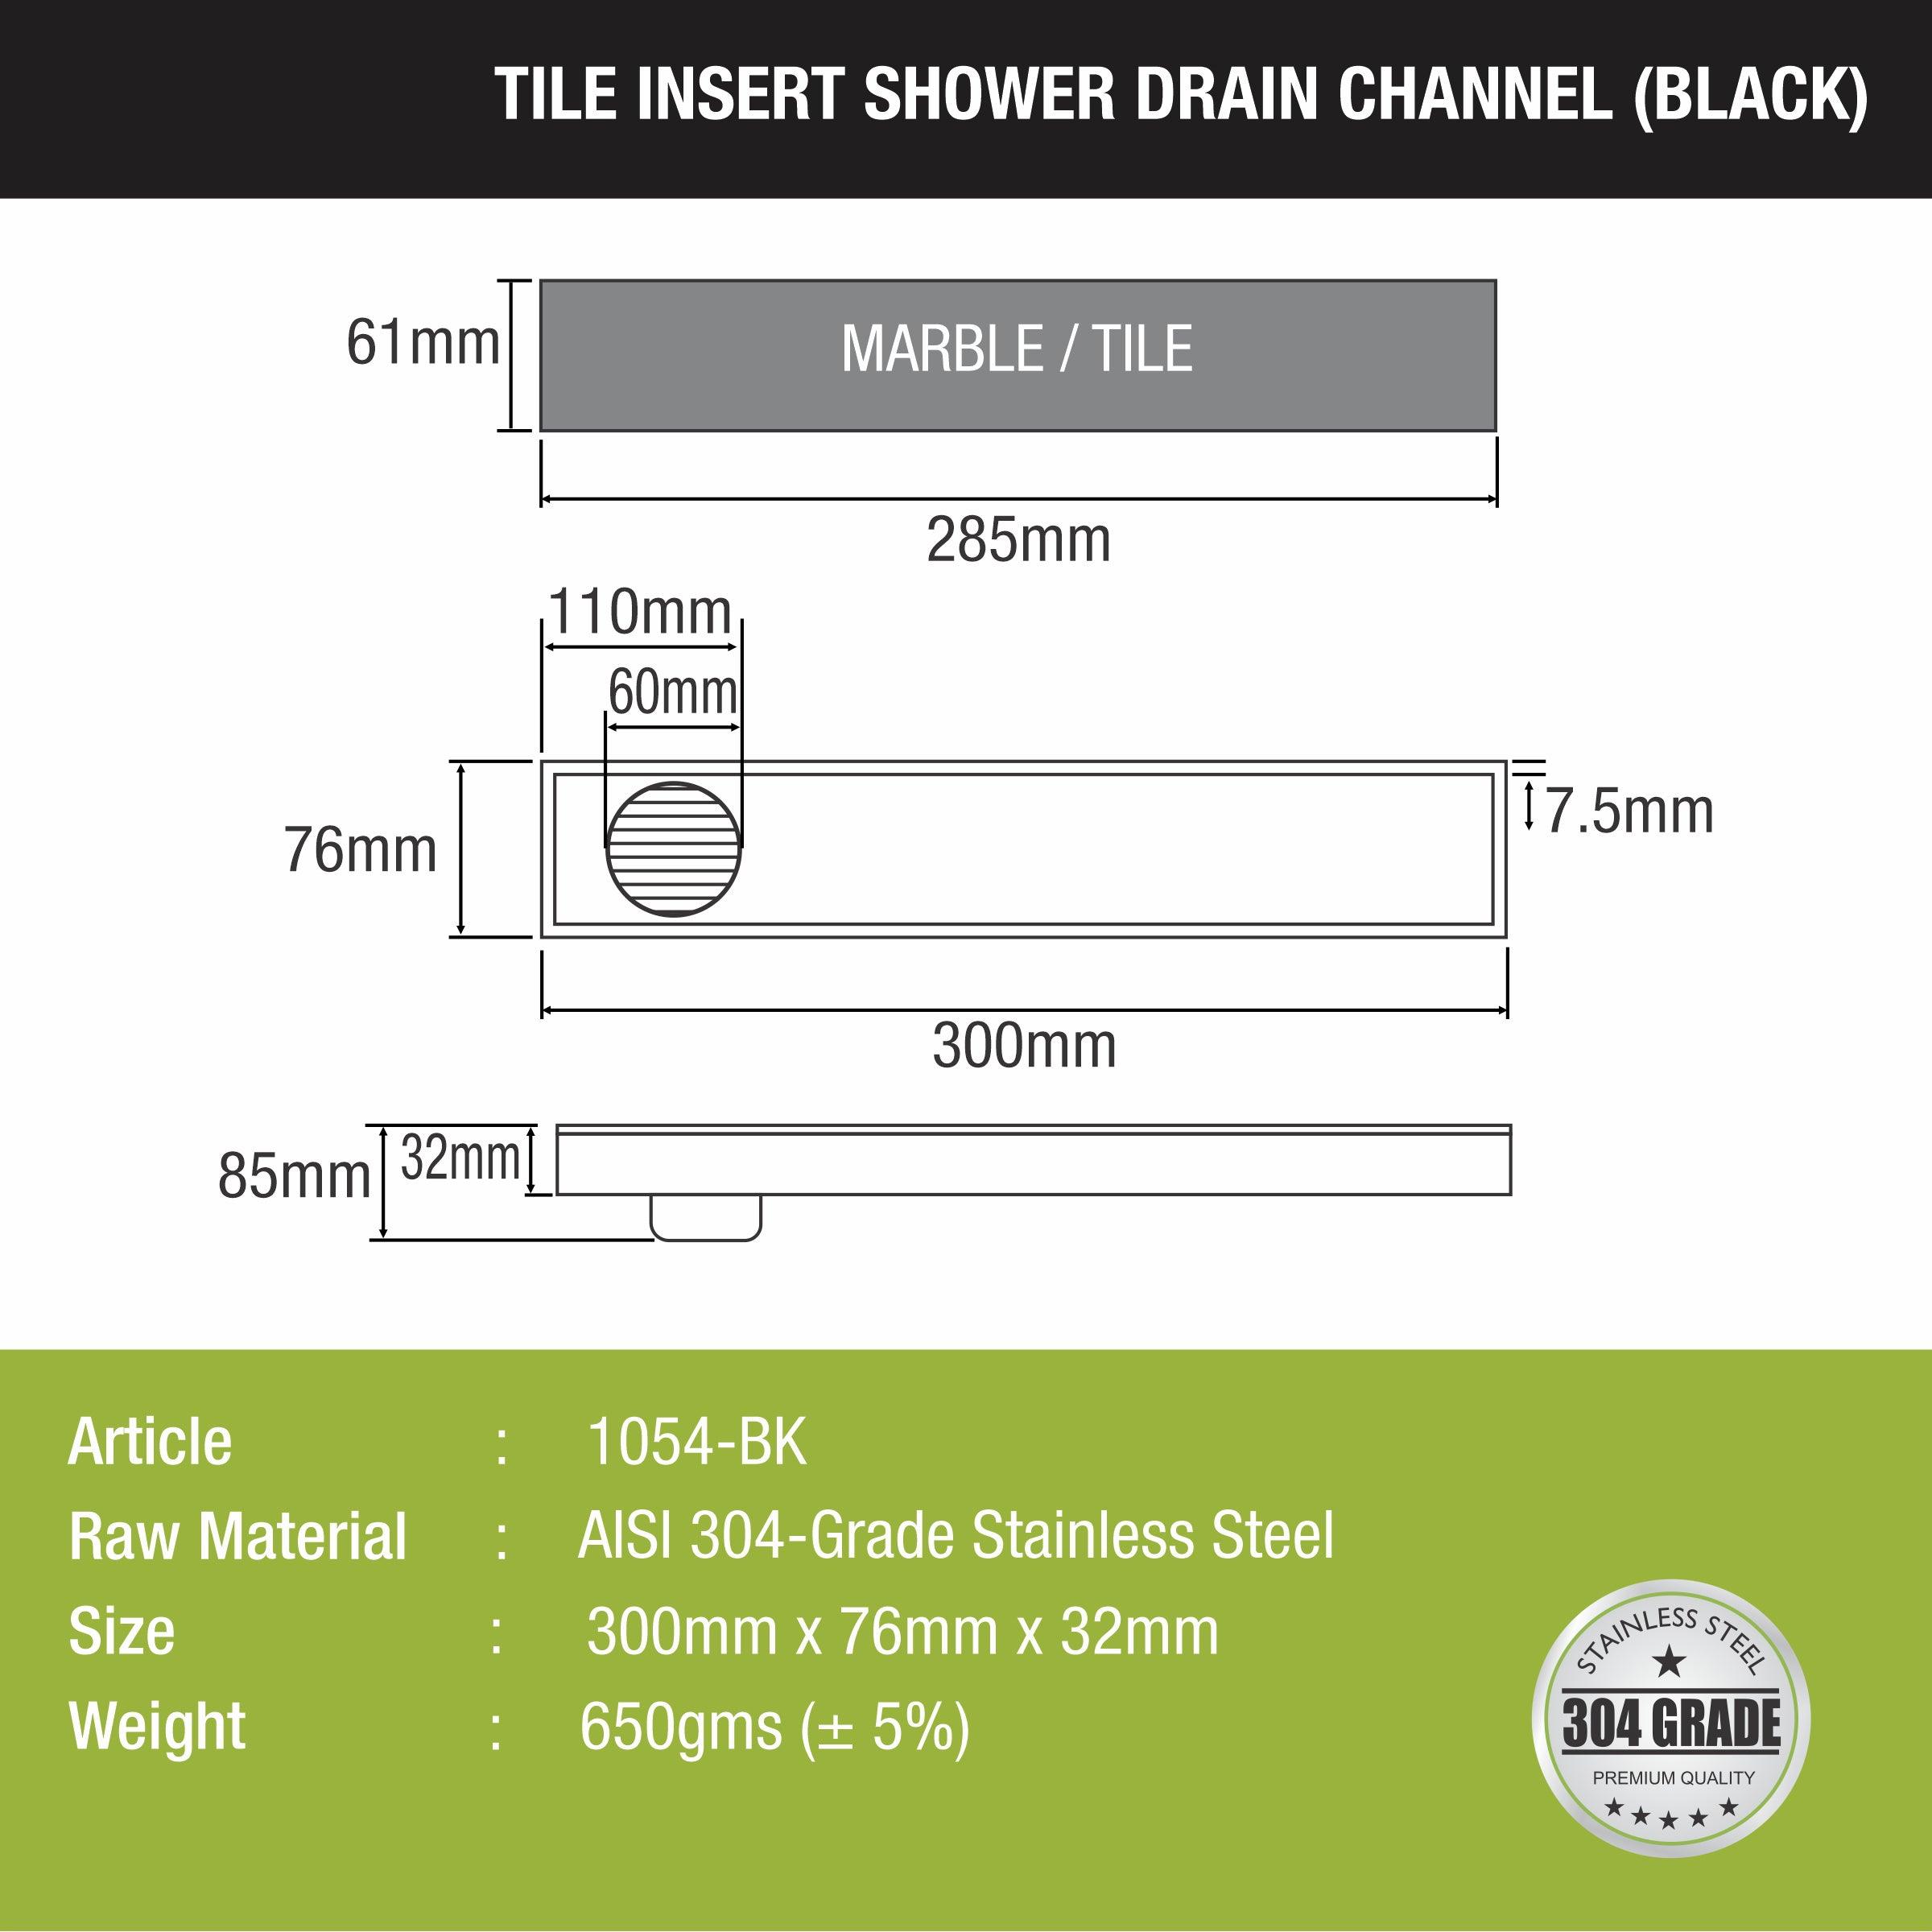 Tile Insert Shower Drain Channel - Black (12 x 3 Inches) size and measurement